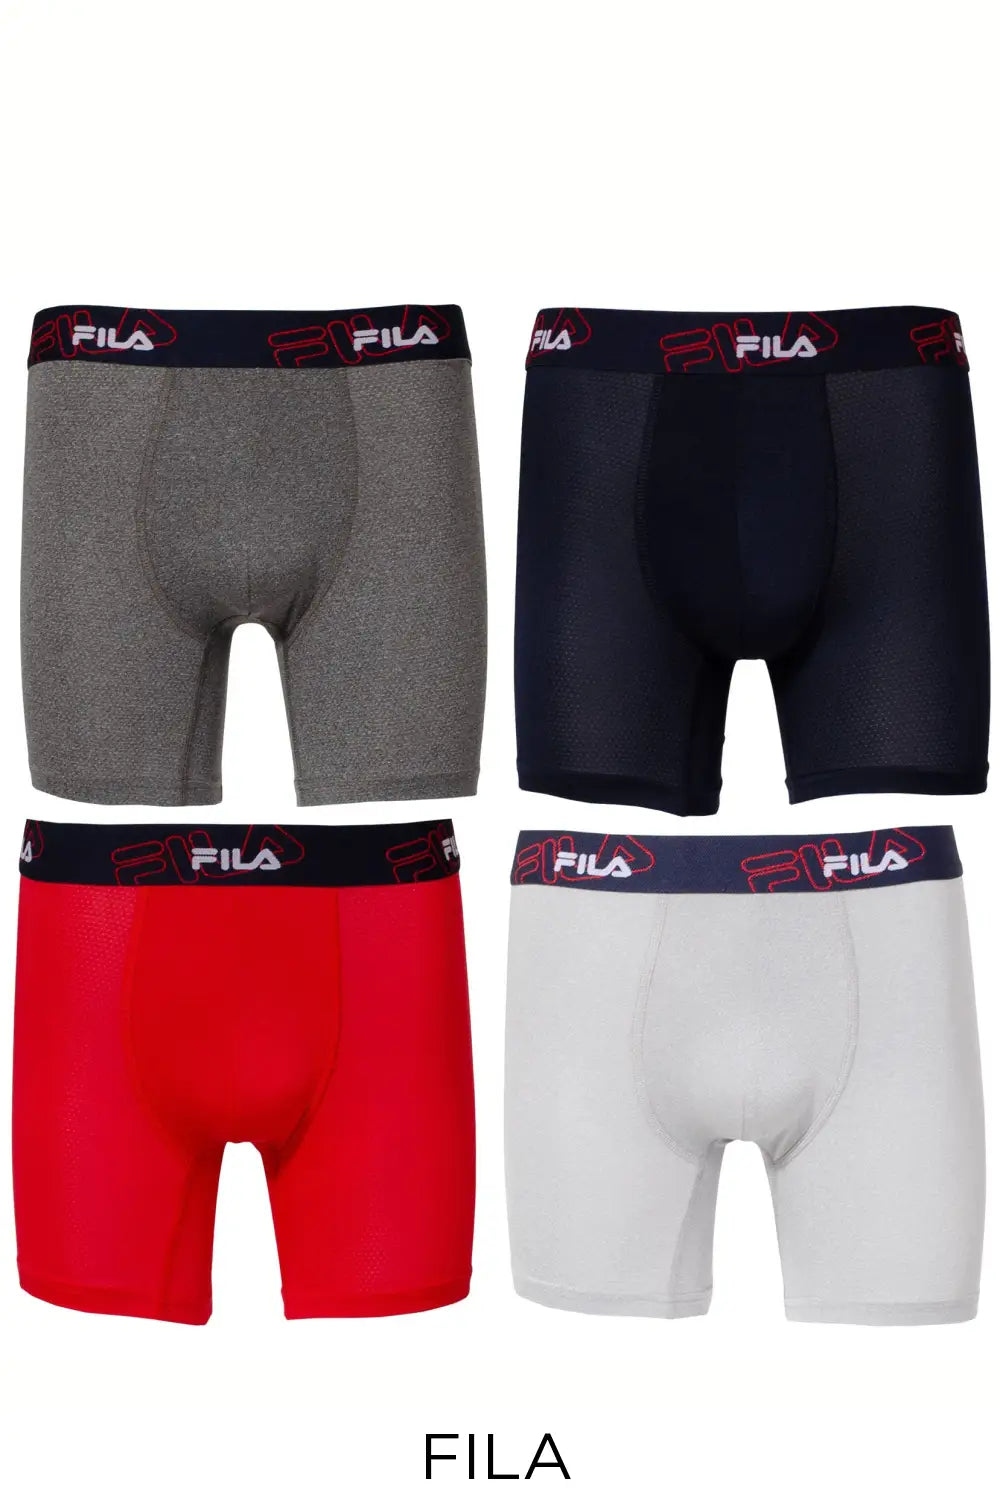 Fila Breathable Boxer Briefs 4 Pack Red/Navy/Grey / M